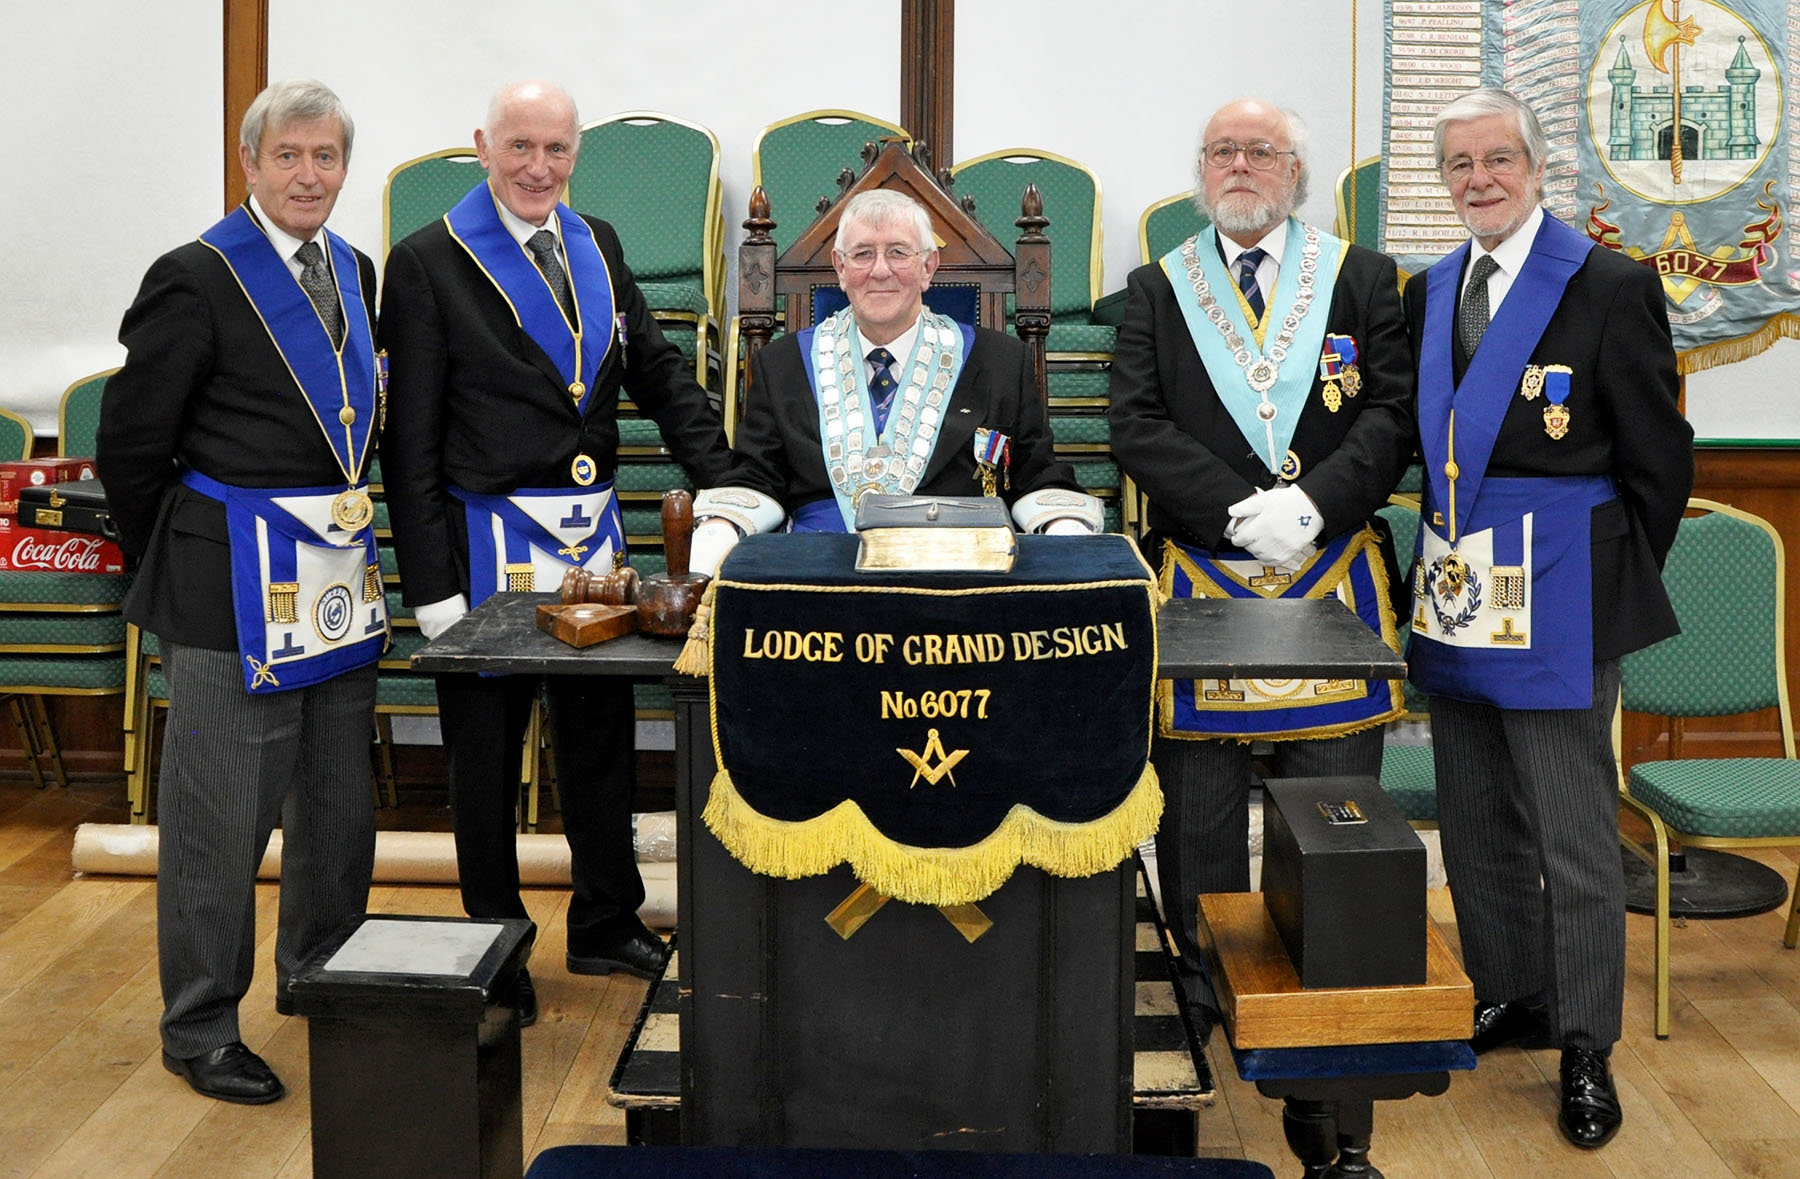 Our Provincial Prior in the Chair of his Craft Lodge